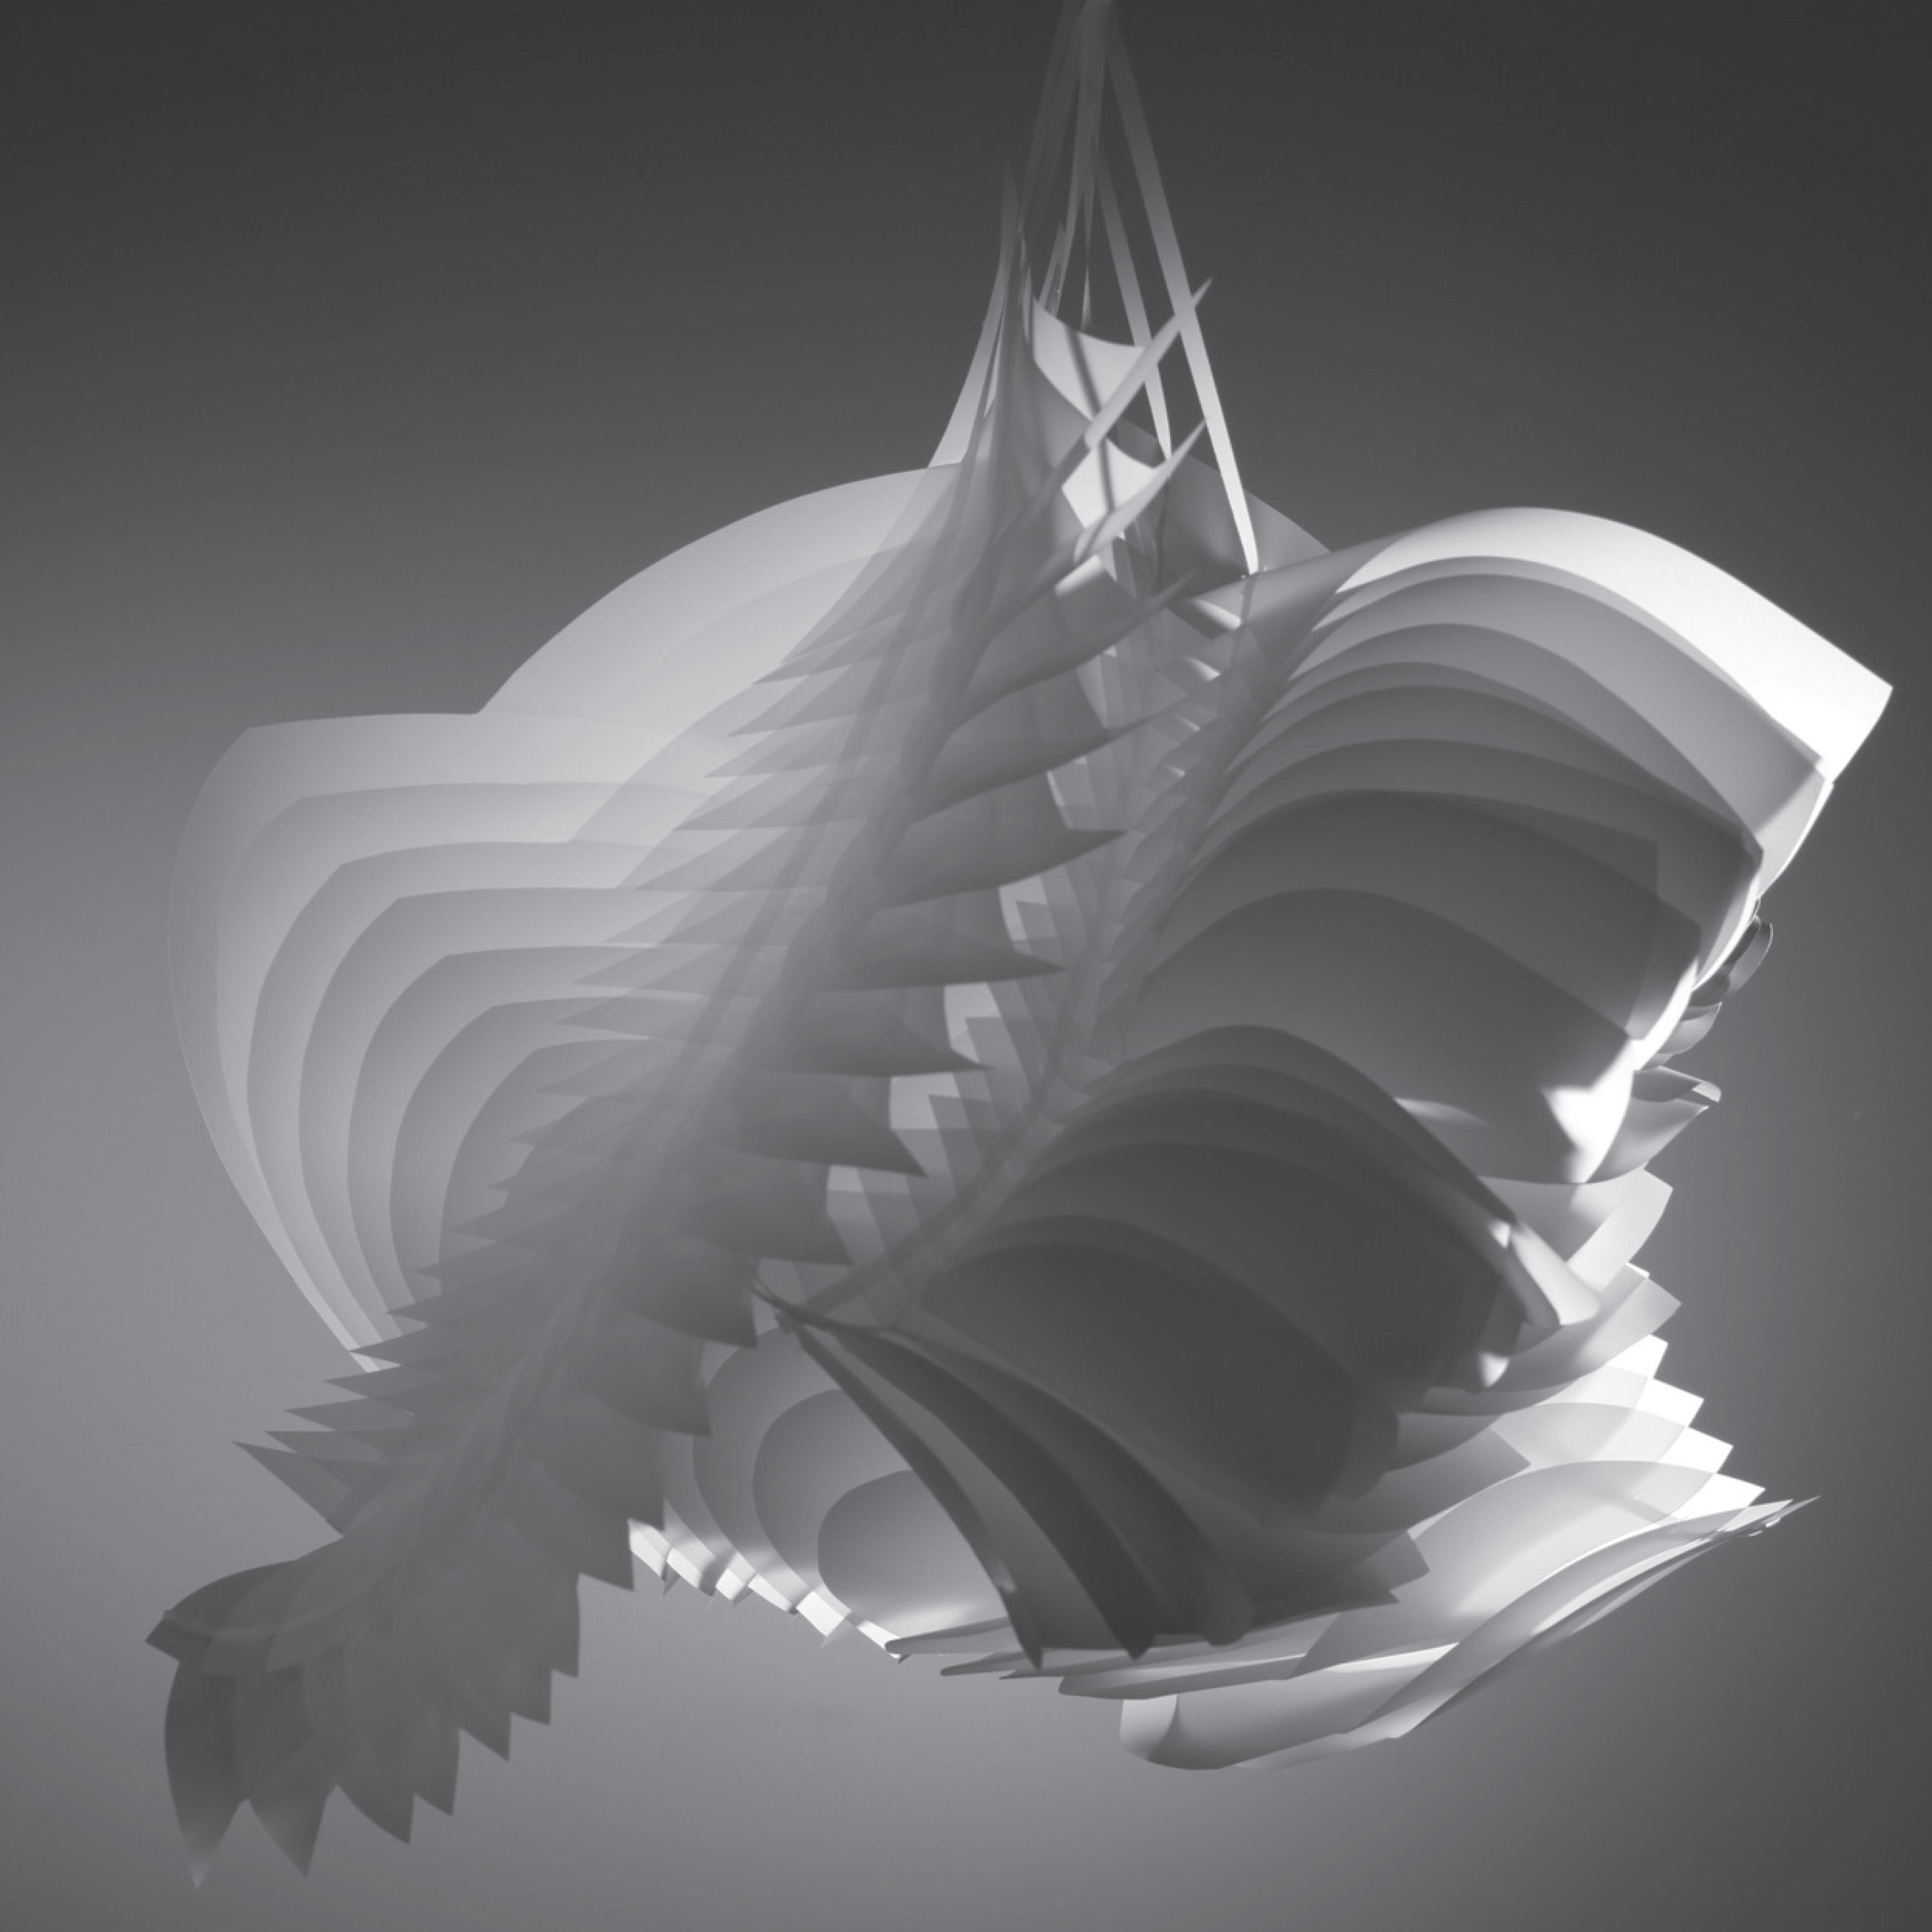 An abstract paper sculpture created from repetitive forms and layers of paper.